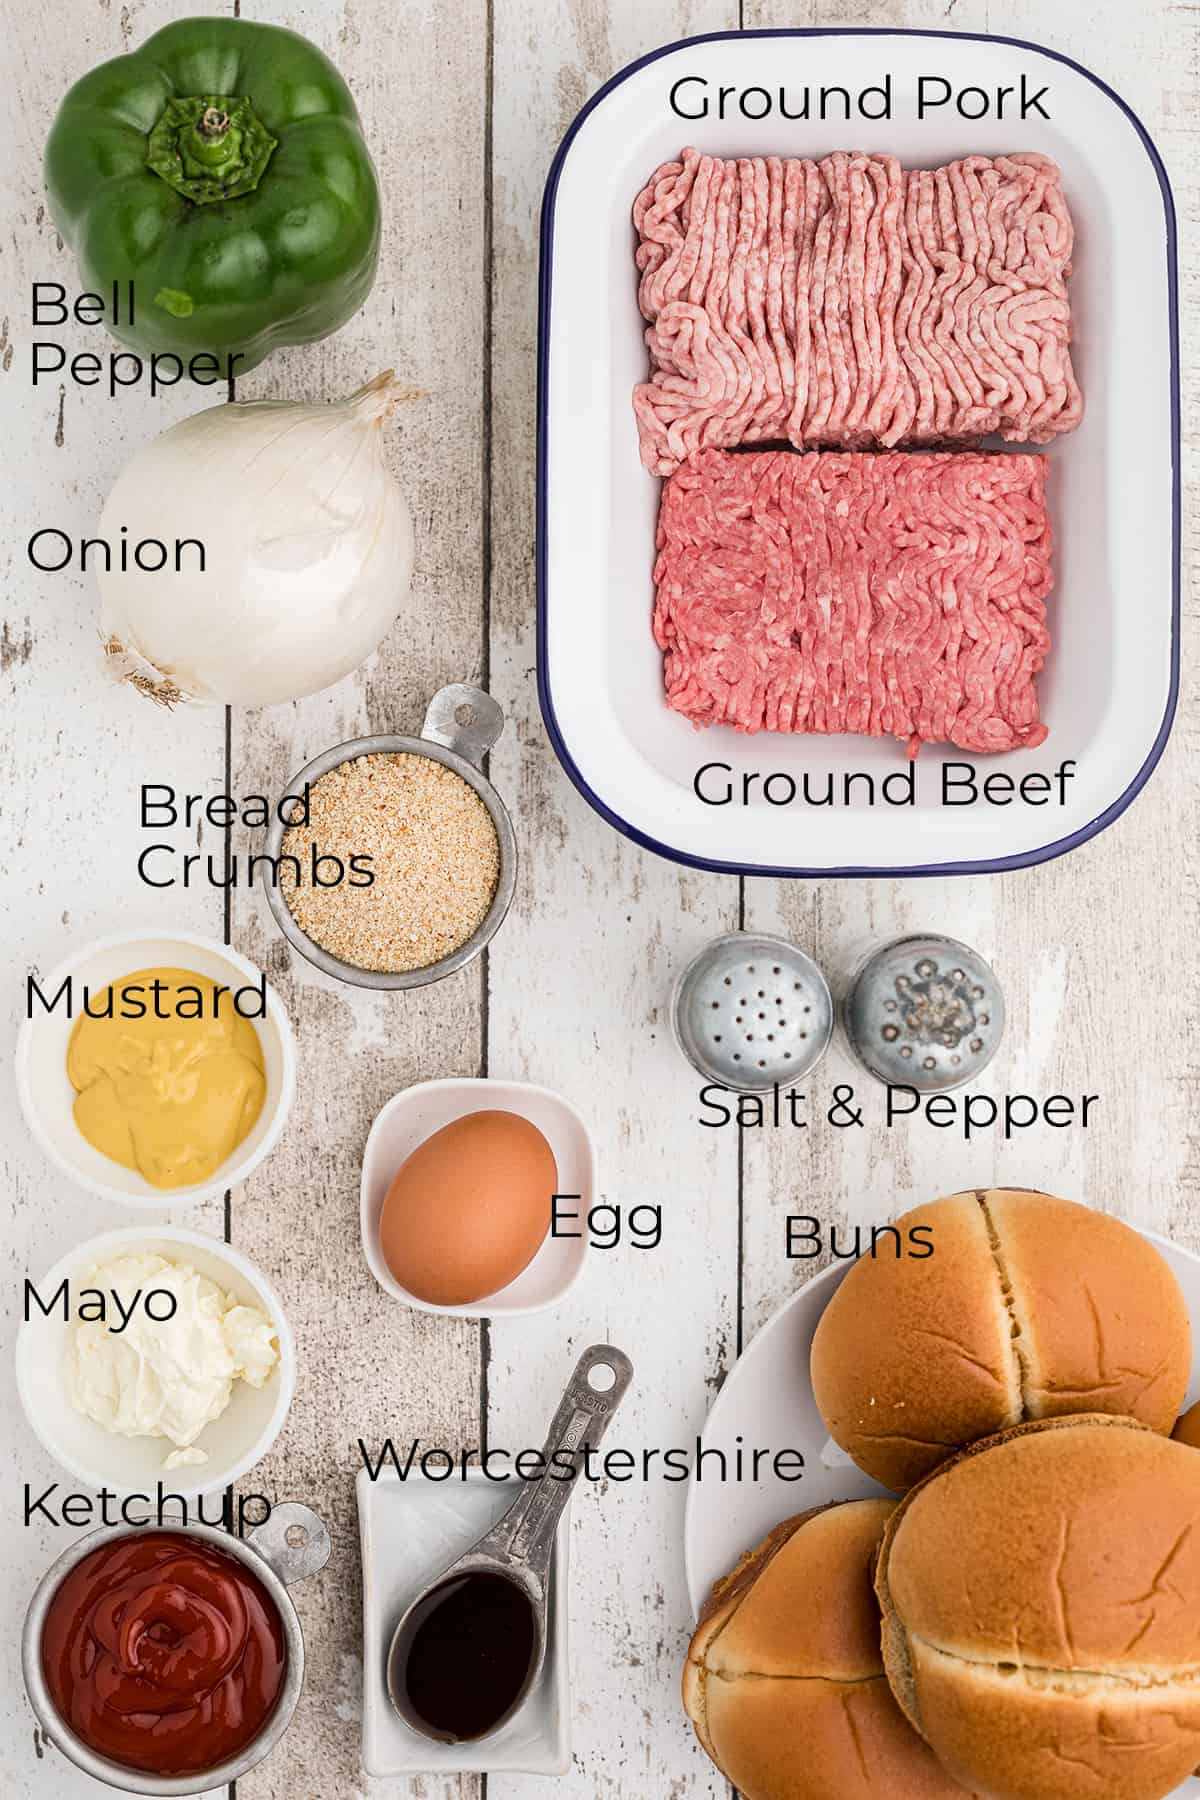 Photo showing all ingredients used in the recipe.